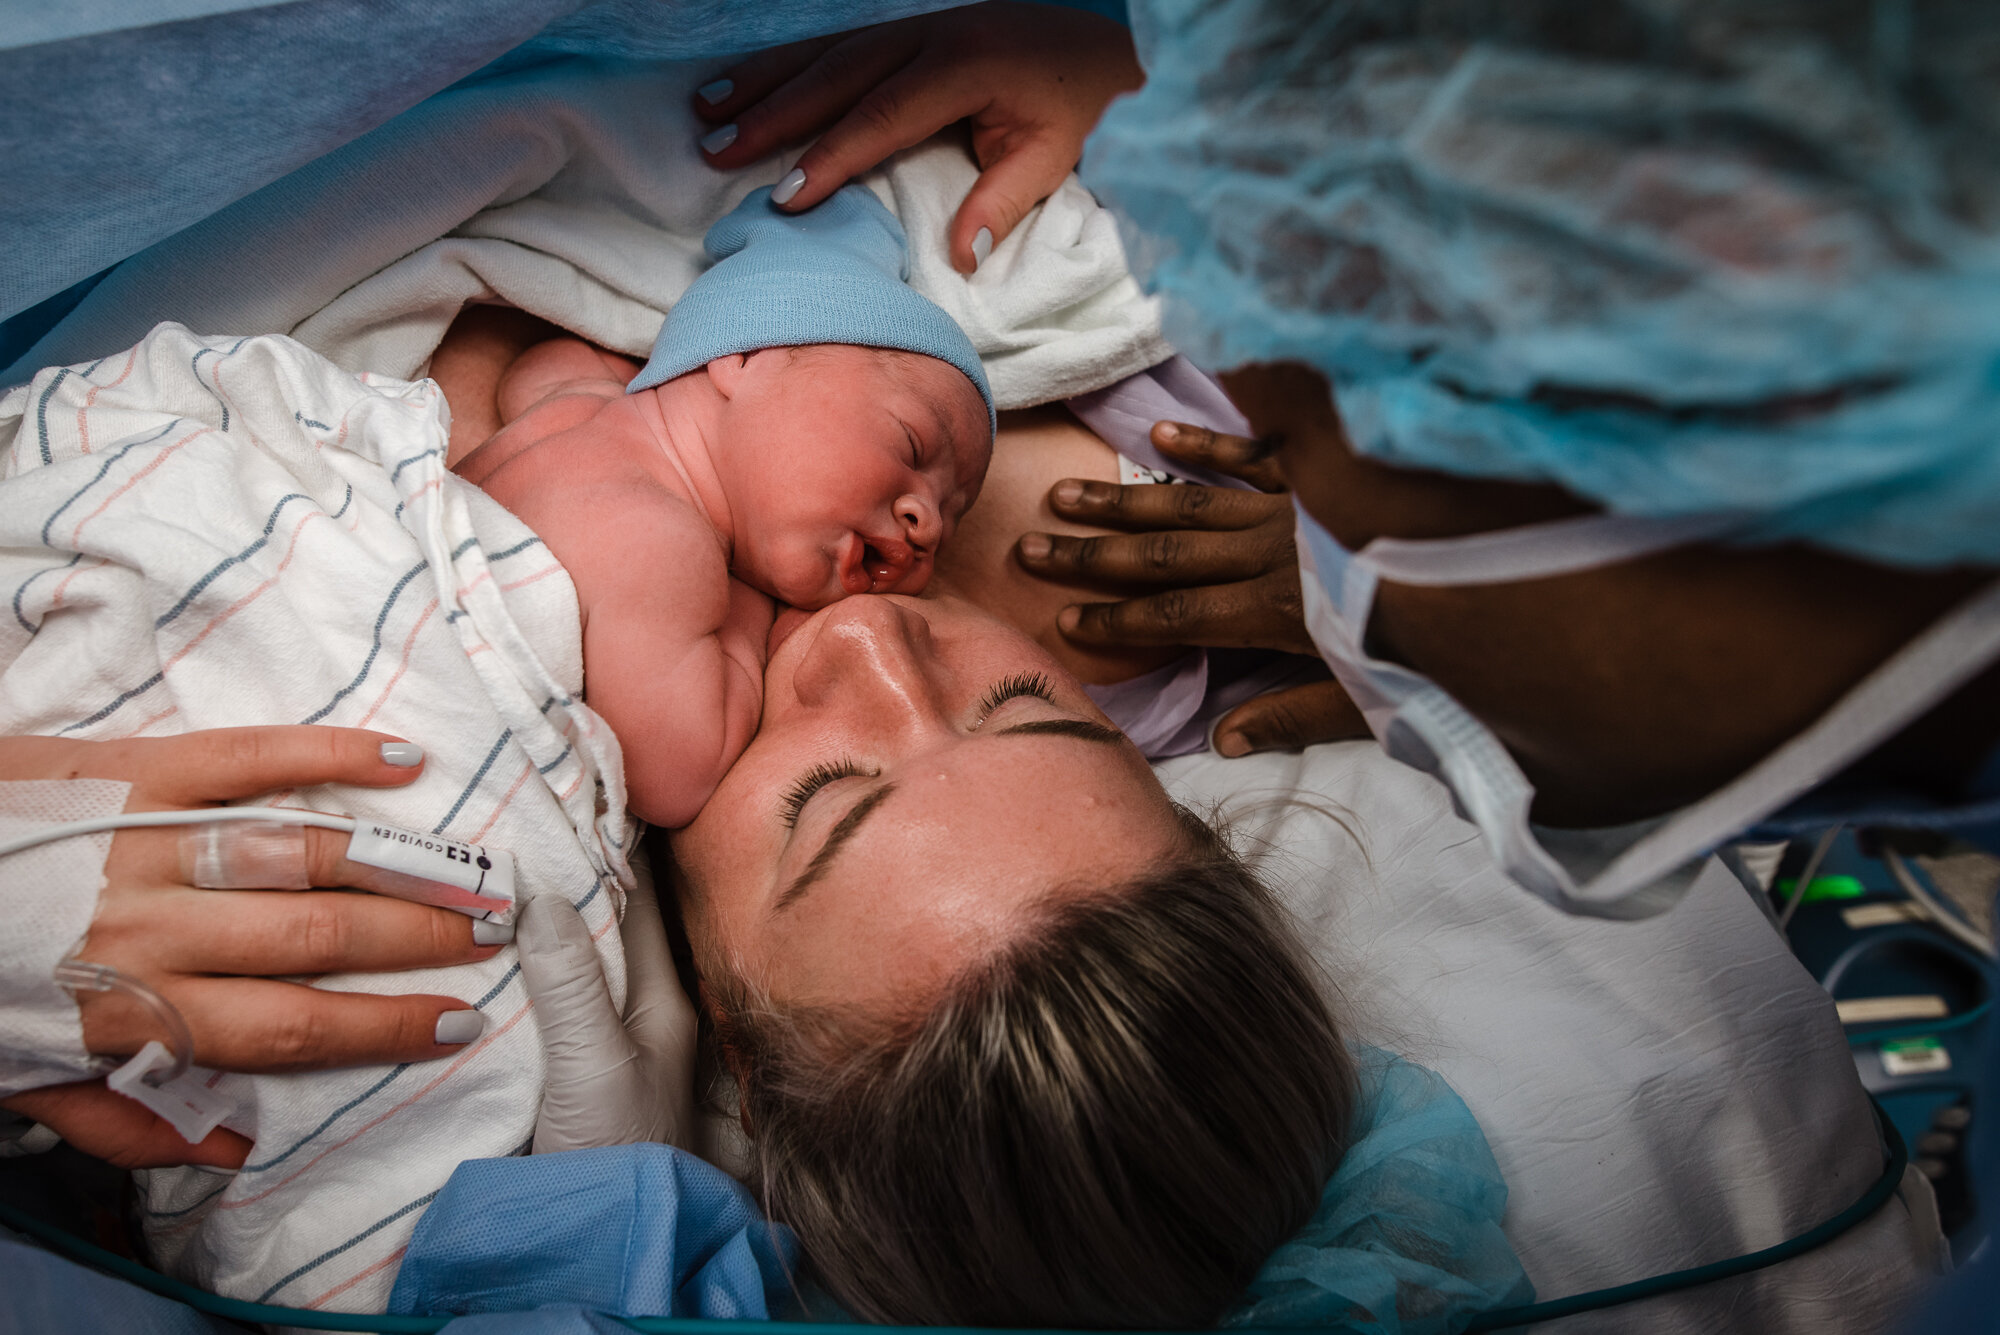 Gather+Birth+Cooperative-+Photography+and+Doula+Support+-September+10,+2019-140834.jpg